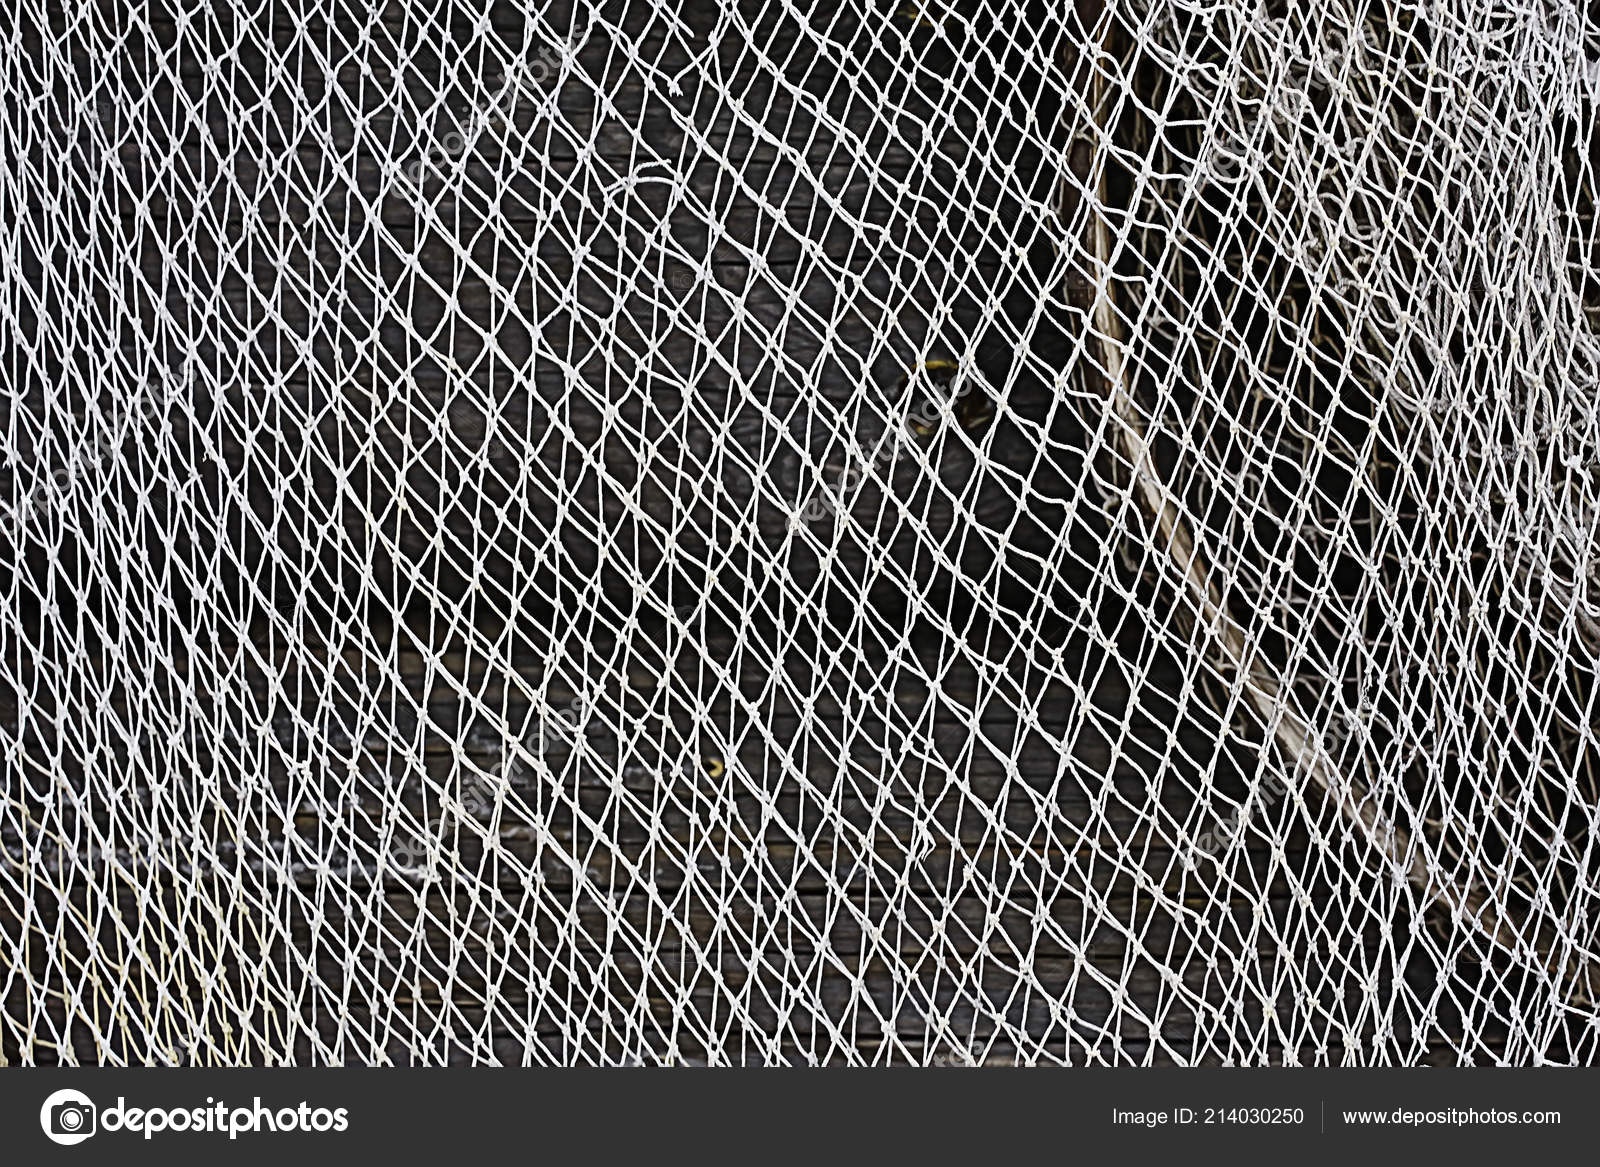 Old Fishing Net Texture Rustic Background — Stock Photo © xload #214030250